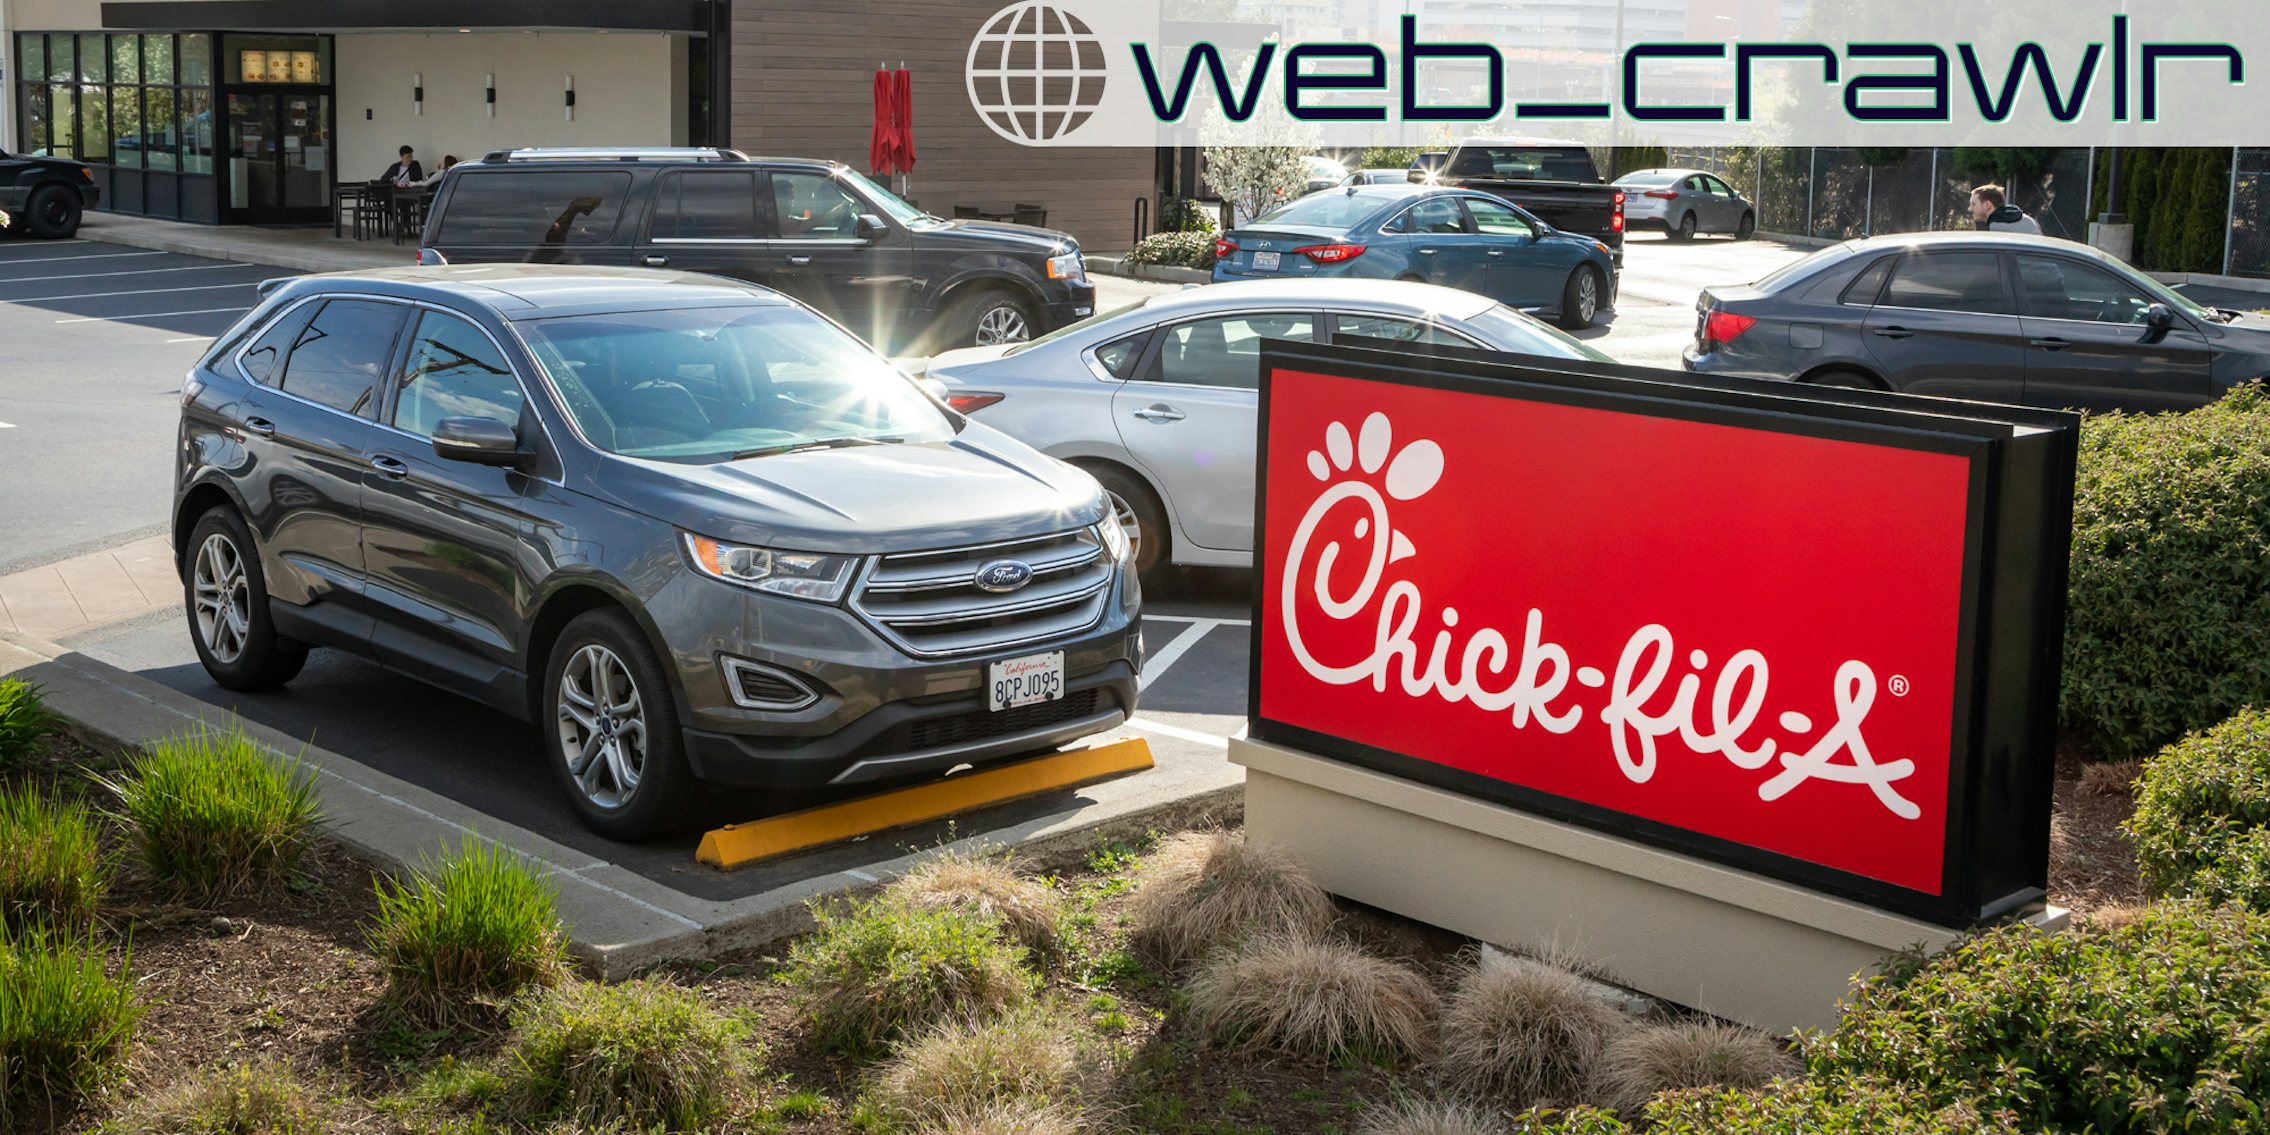 A car parked next to a Chick-fil-A sign. The Daily Dot newsletter web_crawlr logo is in the top right corner.